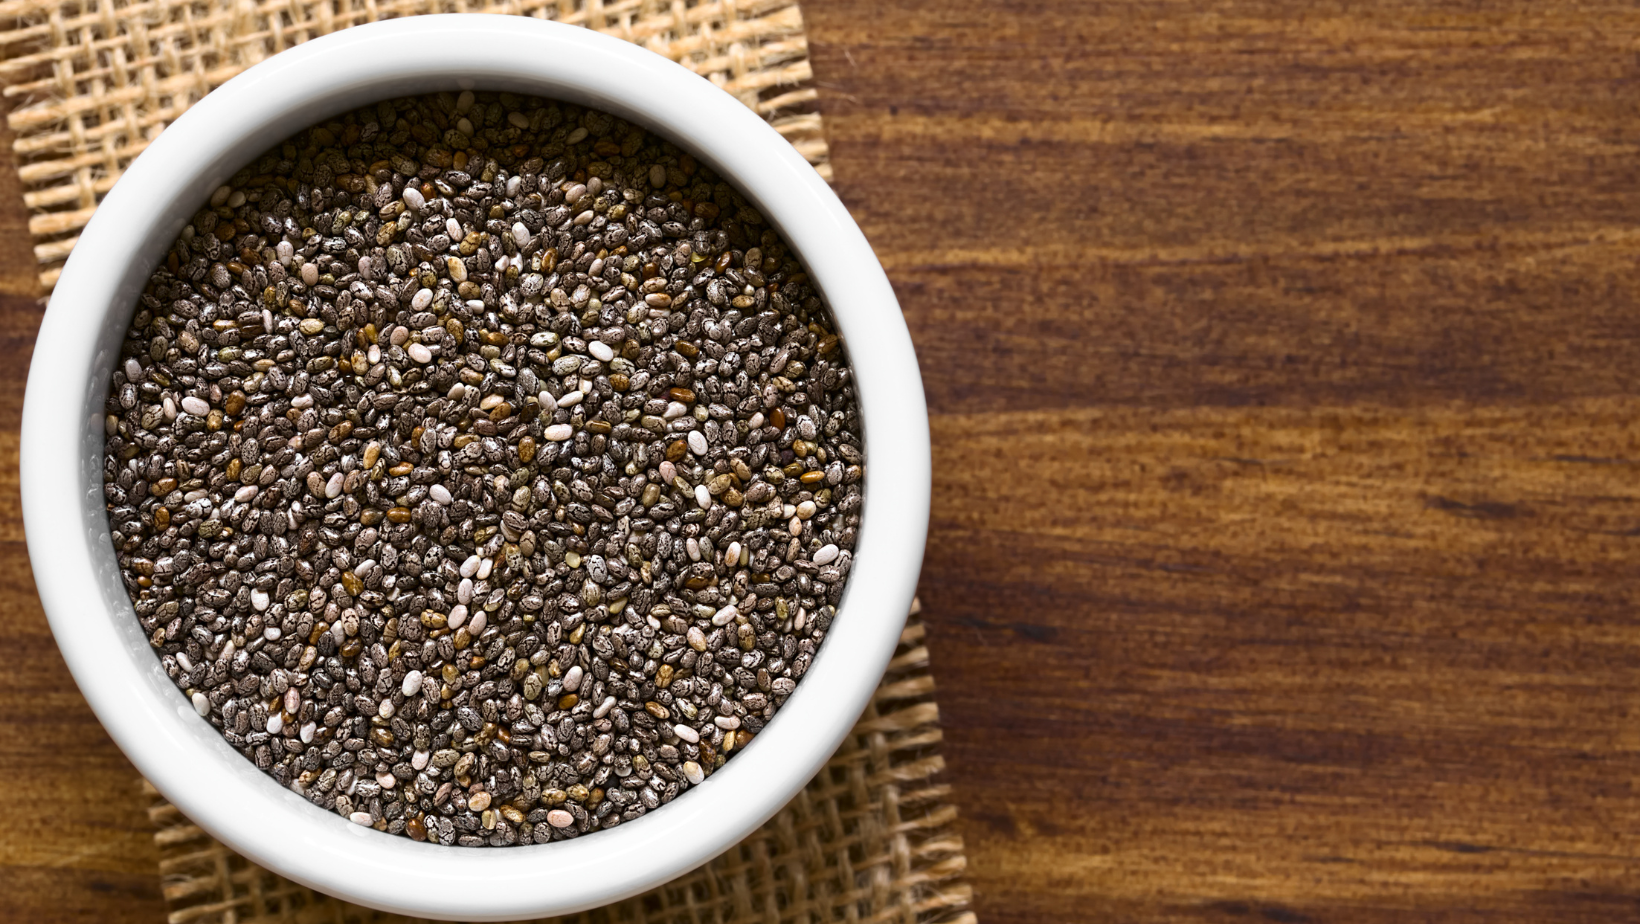 Are Chia Seeds Good for Diabetics?